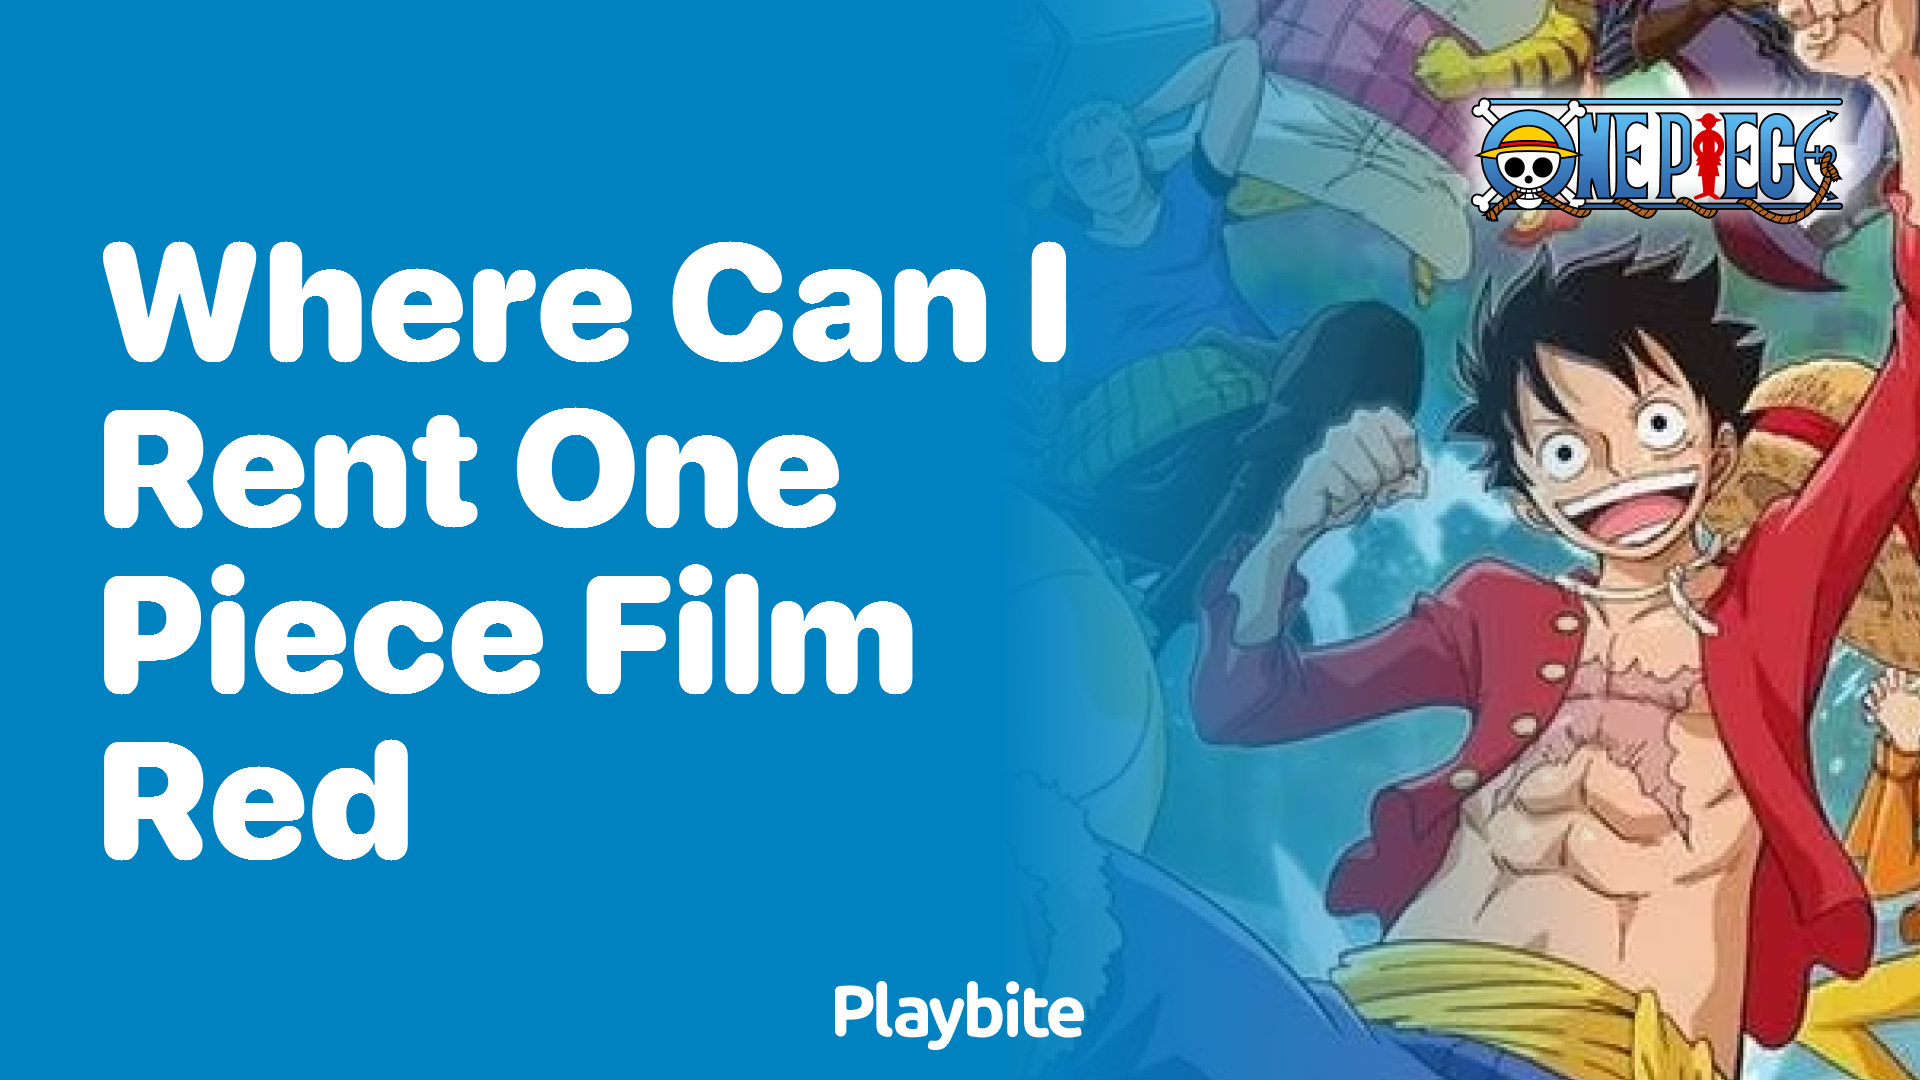 Where can I rent One Piece Film Red?